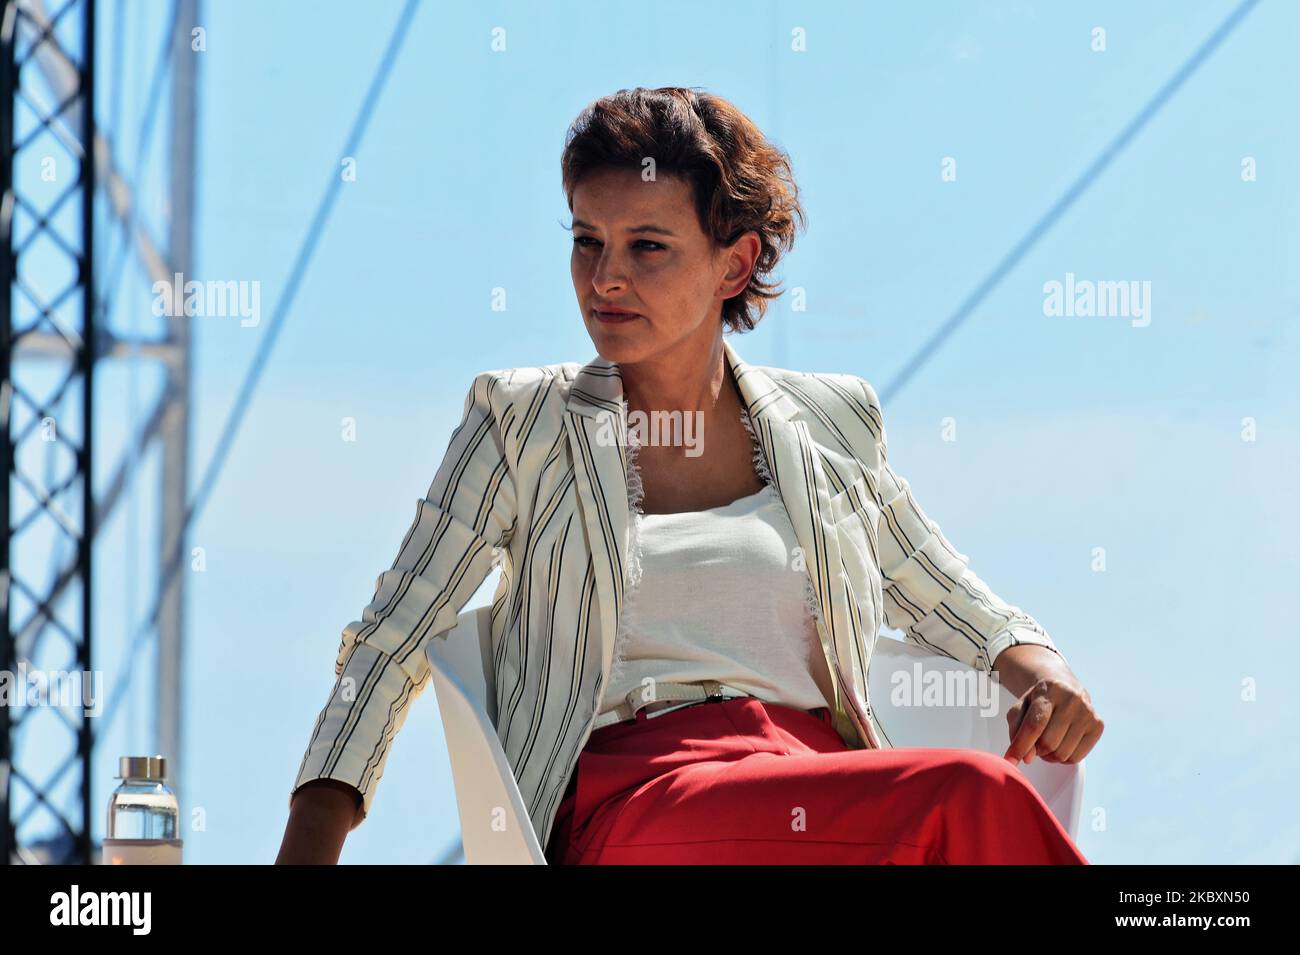 Former French Education Minister Najat Vallaud-Belkacem attends at the meeting of French employers' association Medef themed 'The Renaissance of French Companies' on August 27, 2020, in Paris, France. (Photo by Daniel Pier/NurPhoto) Stock Photo